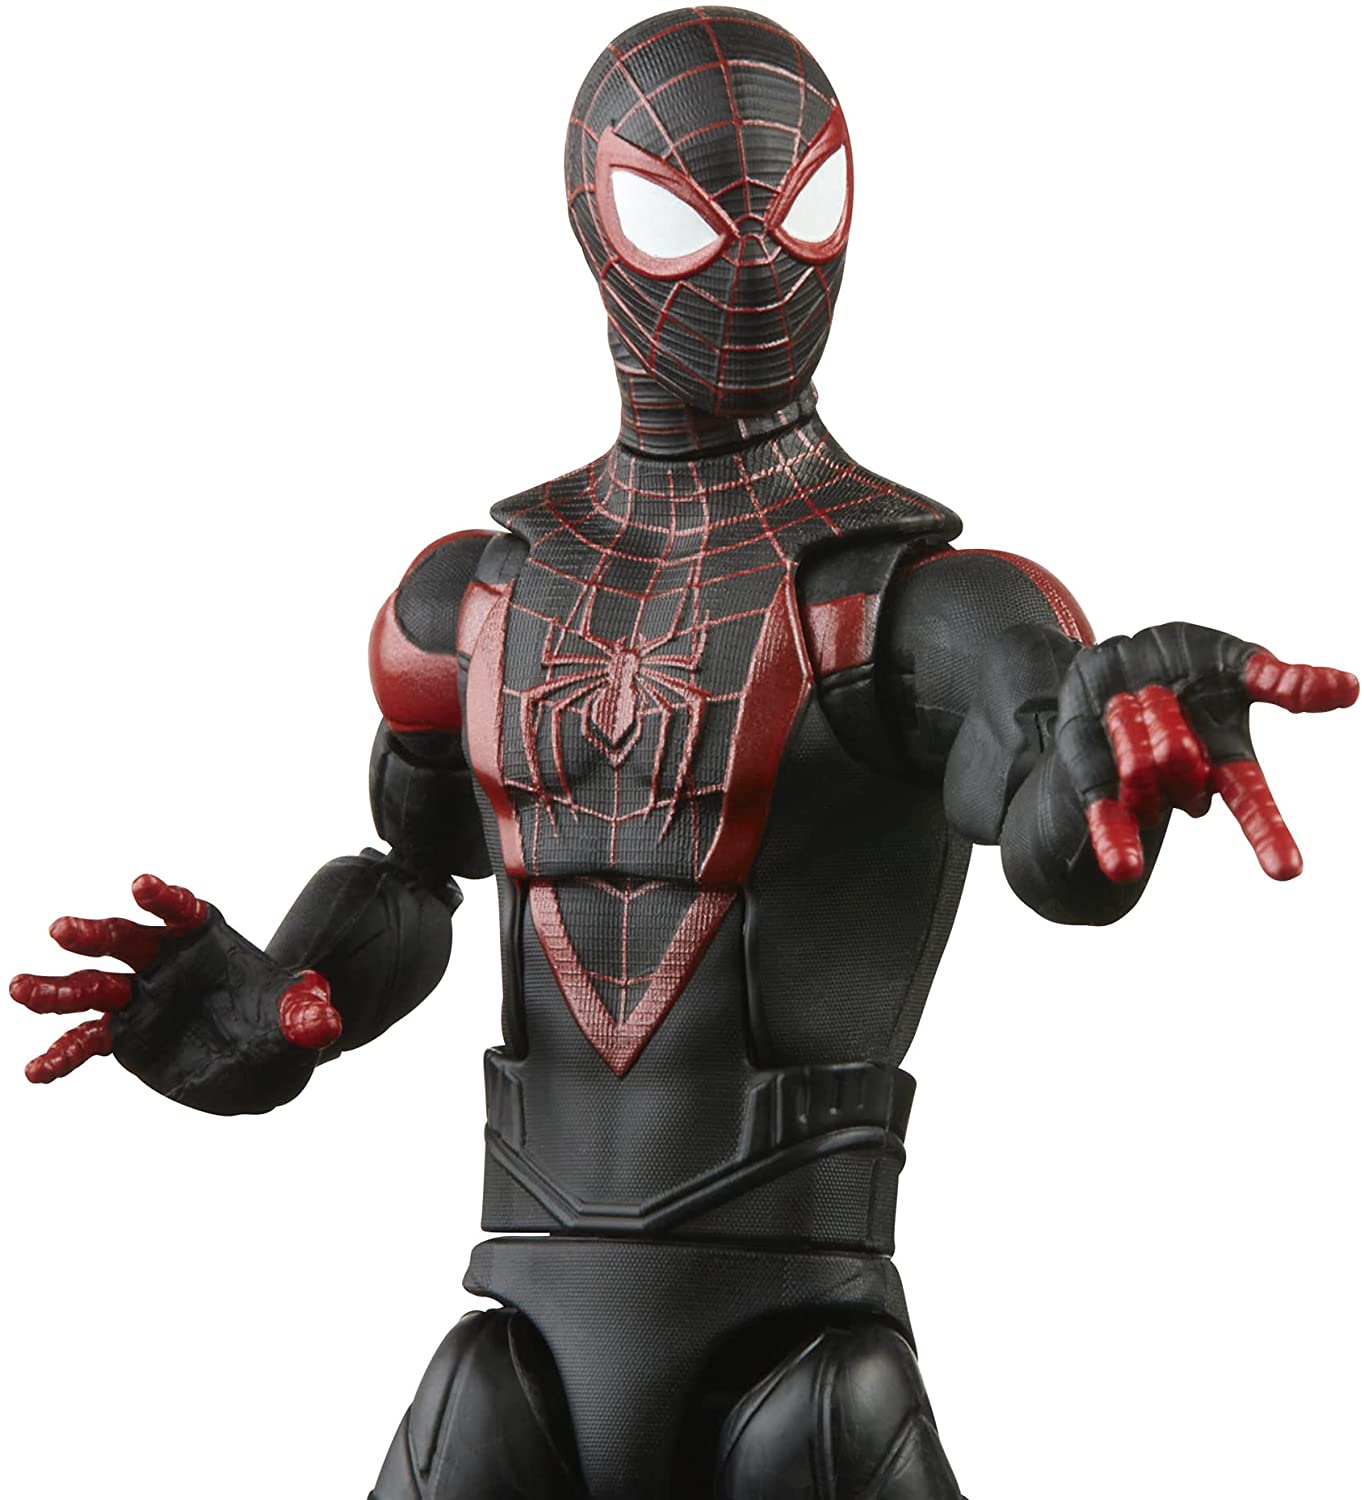 Spider-Man Marvel Legends Series Gamerverse Miles Morales 6-inch Collectible Action Figure Toy and 7 Accessories and 1 Build-A-Figure Part(s) - Action & Toy Figures Heretoserveyou